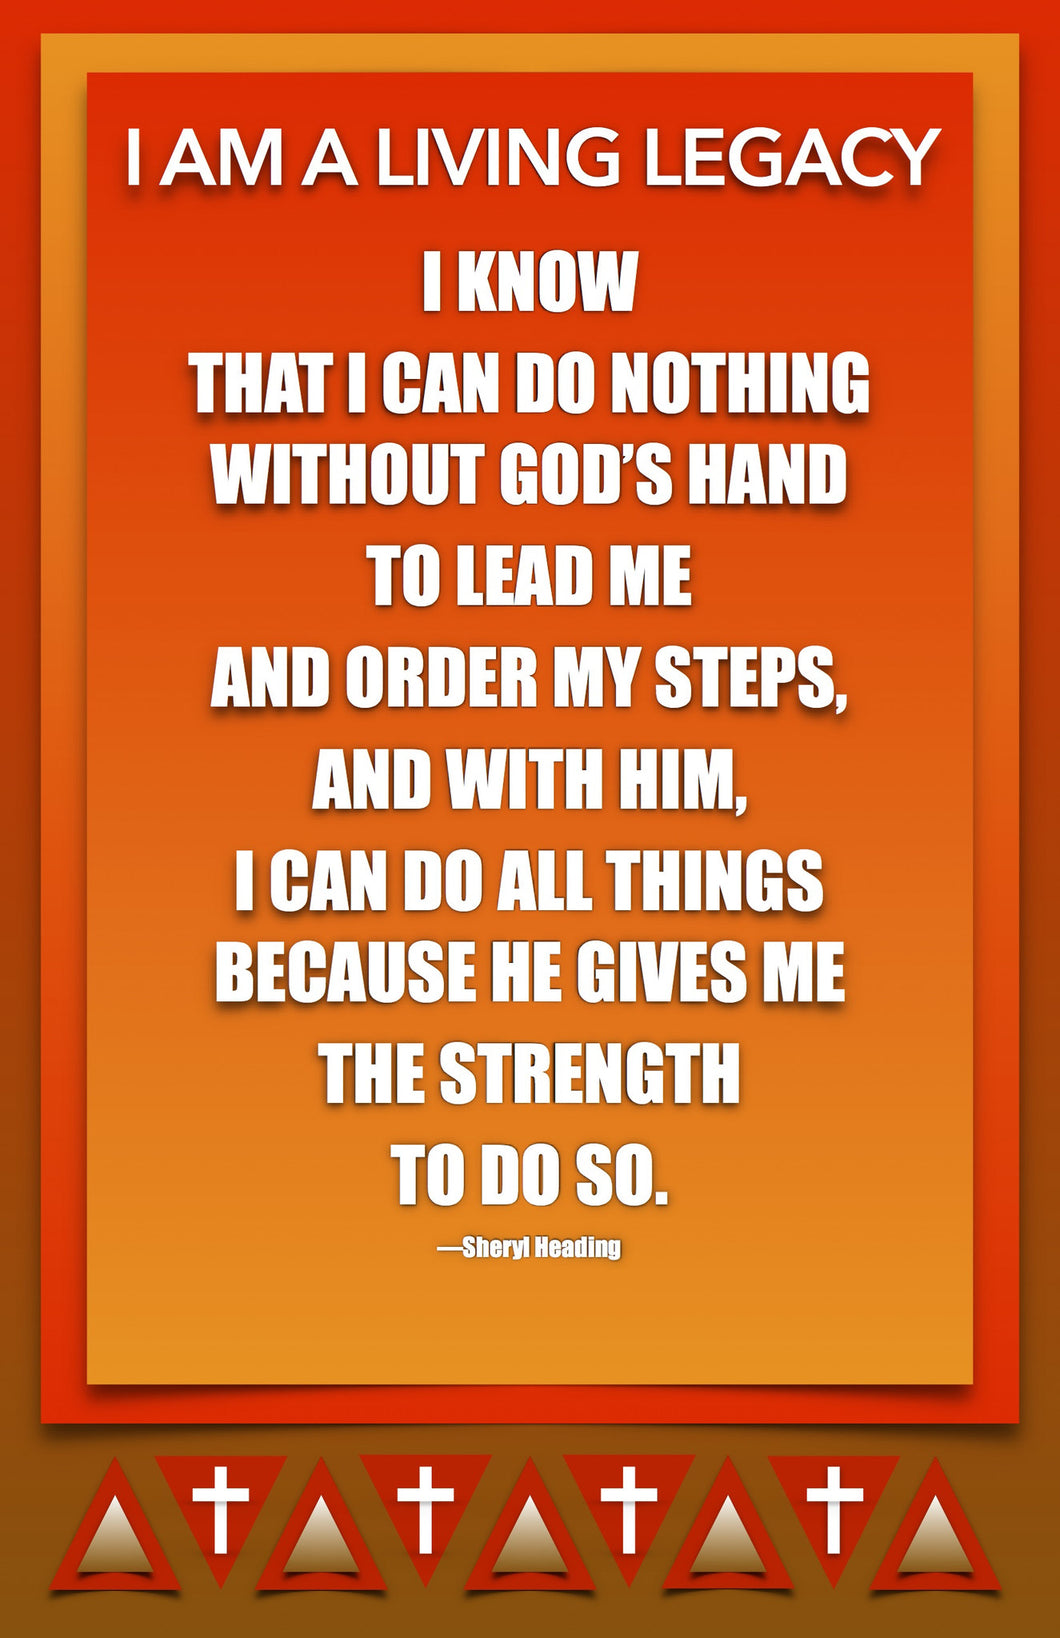 I Am A Living Legacy I Know I Can Do Nothing Without God's Hand Poster - Sheryl Heading Designs